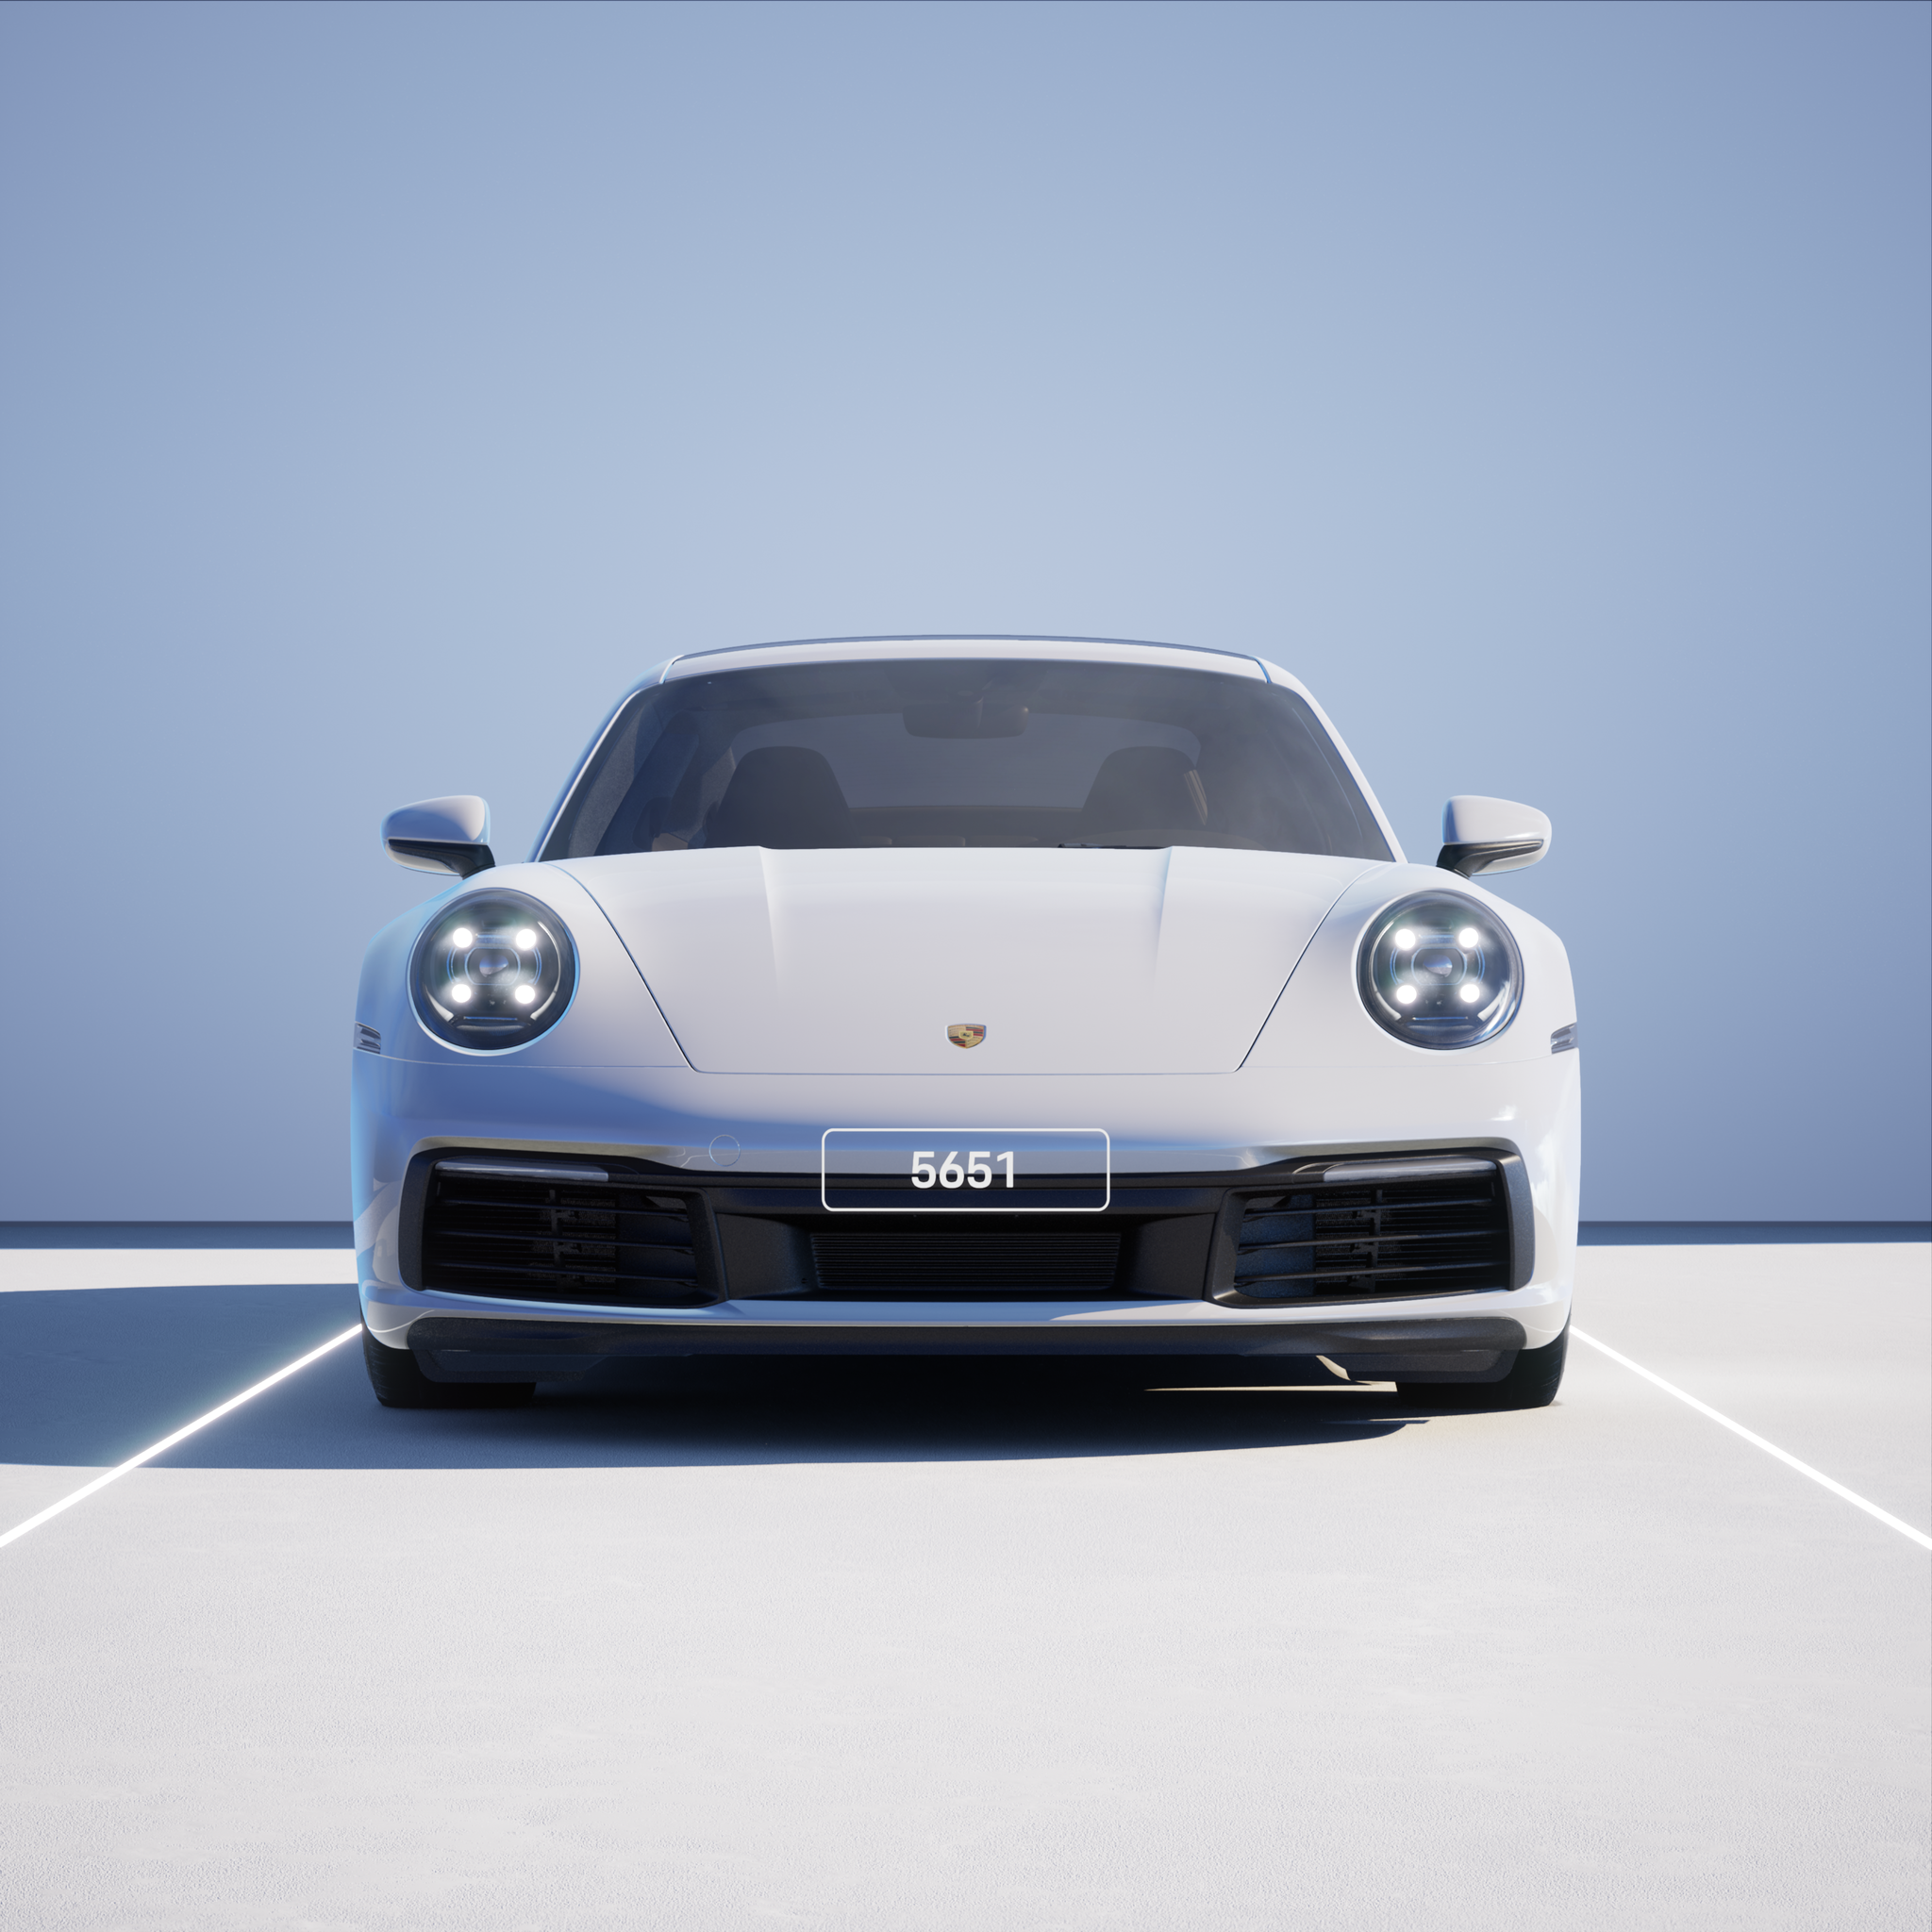 The PORSCHΞ 911 5651 image in phase